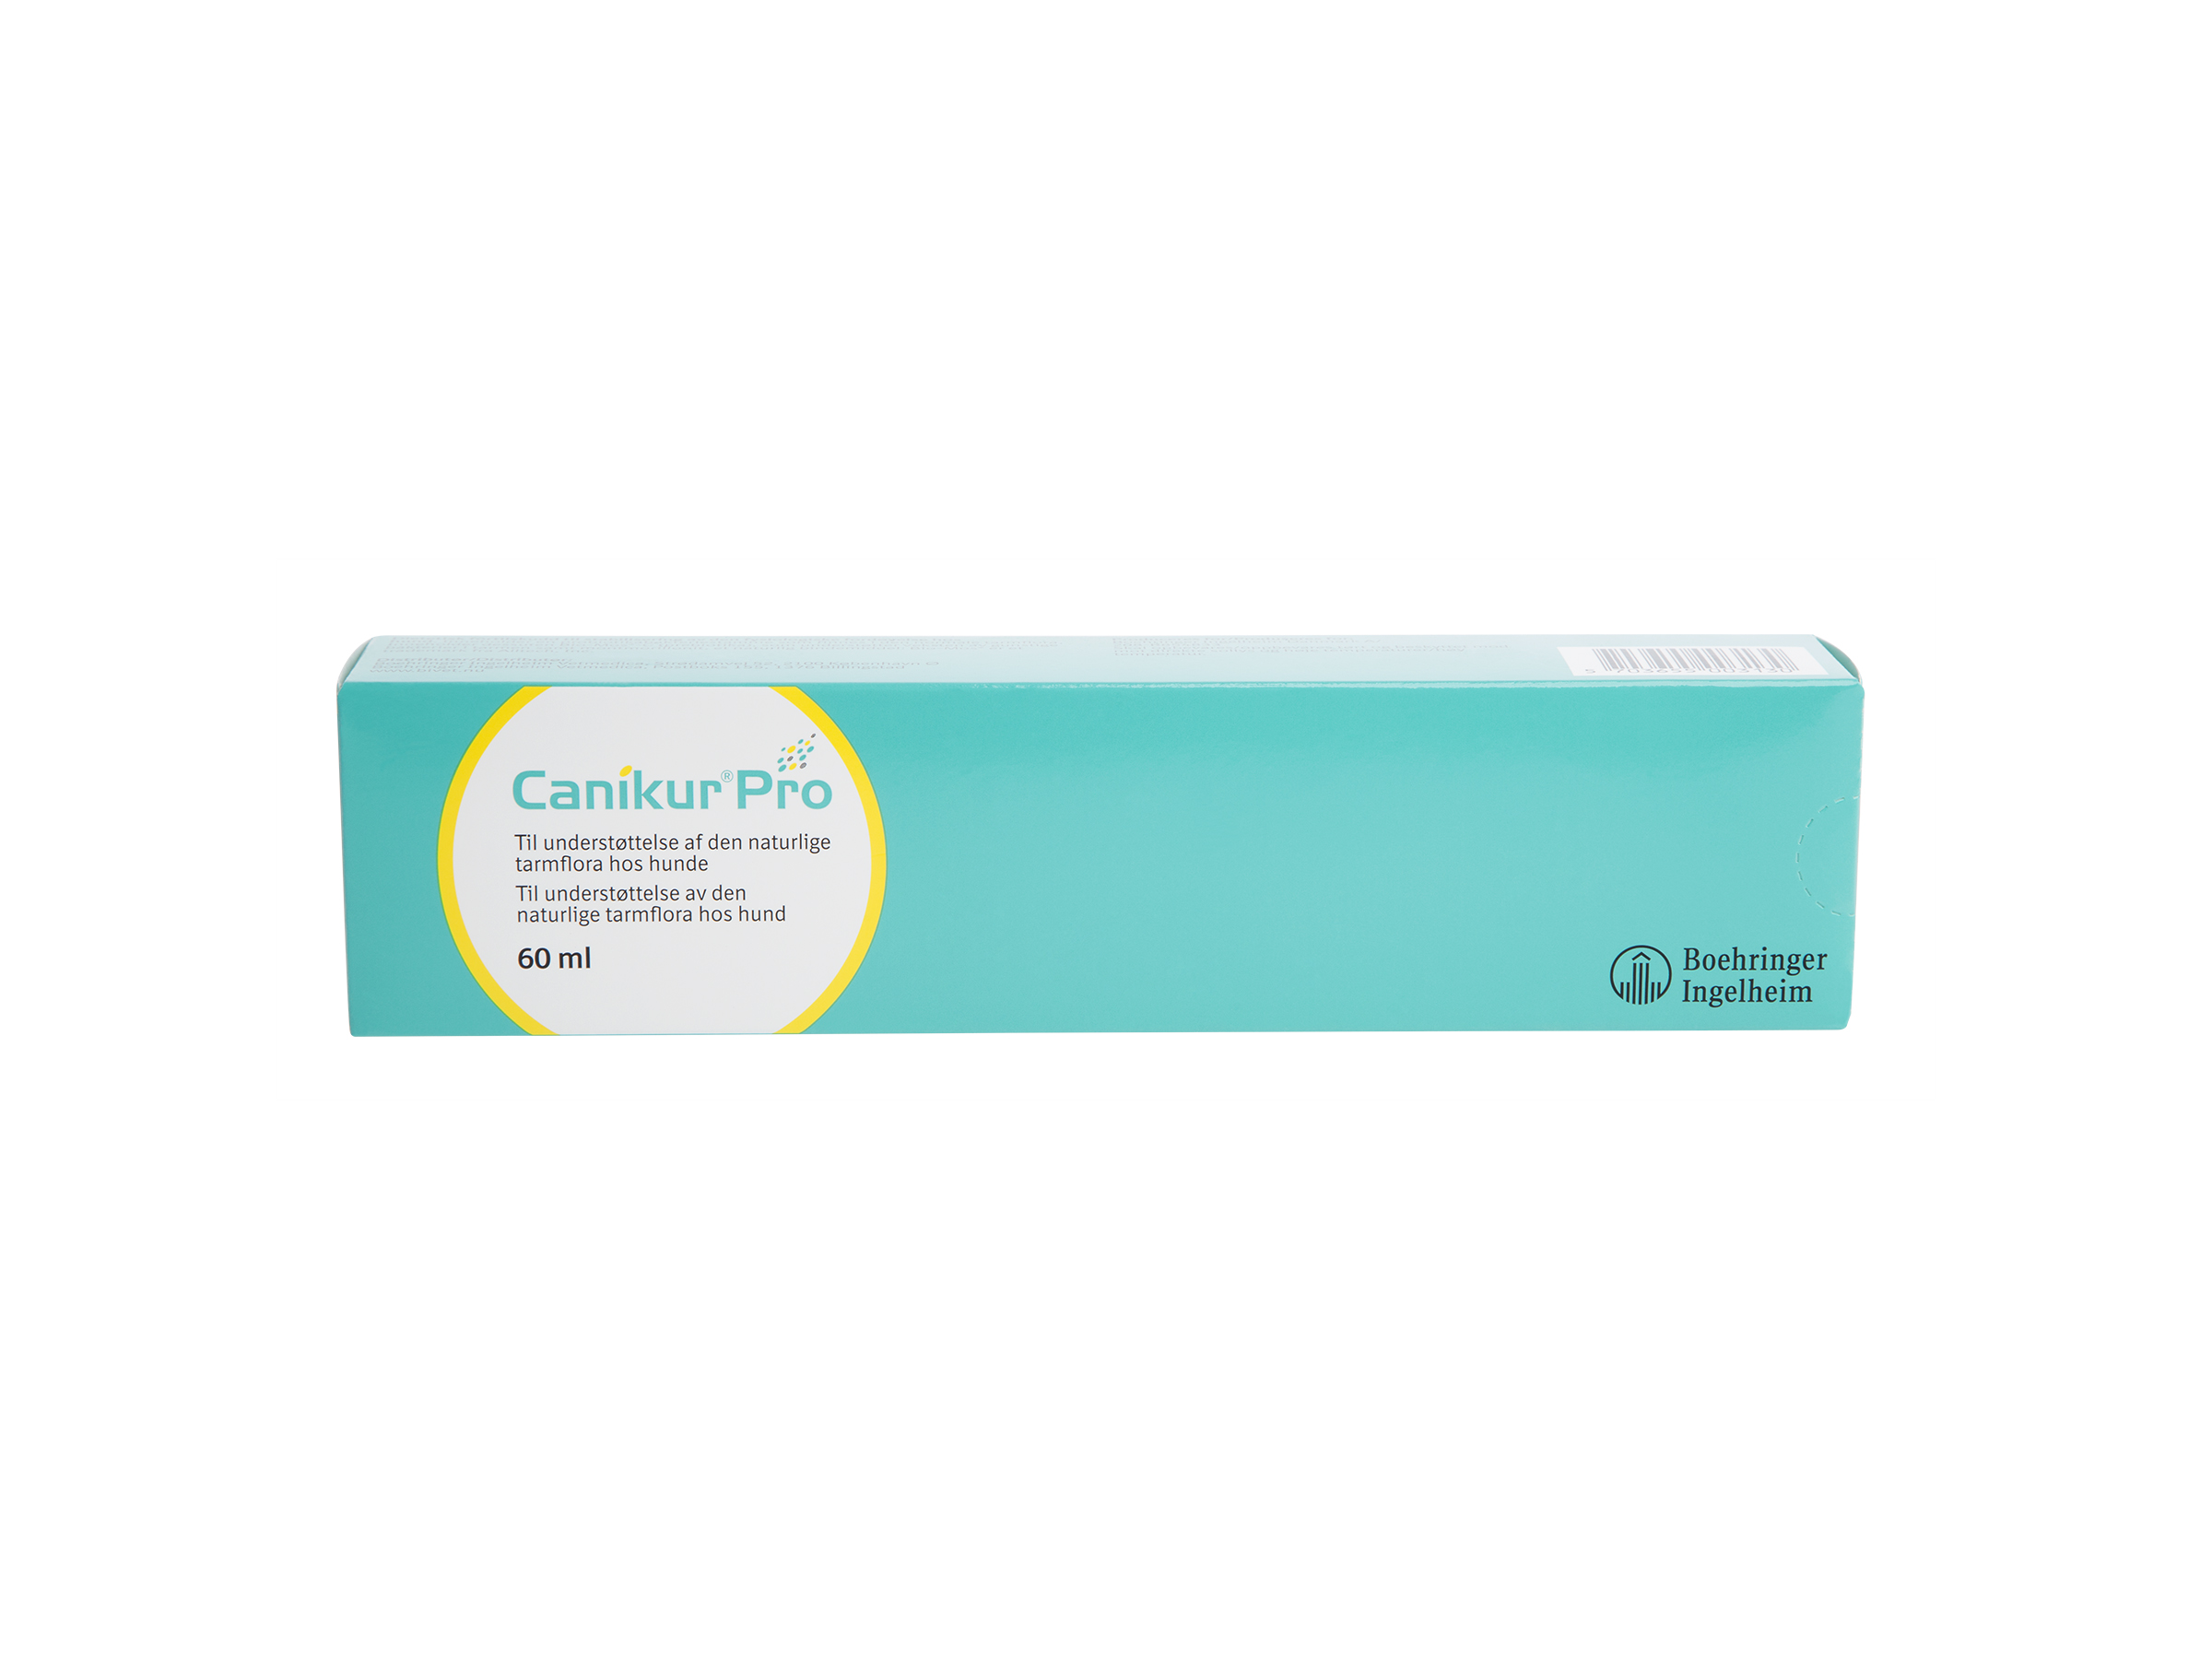 Canikur Pro pasta, fortilskudd, 60 ml